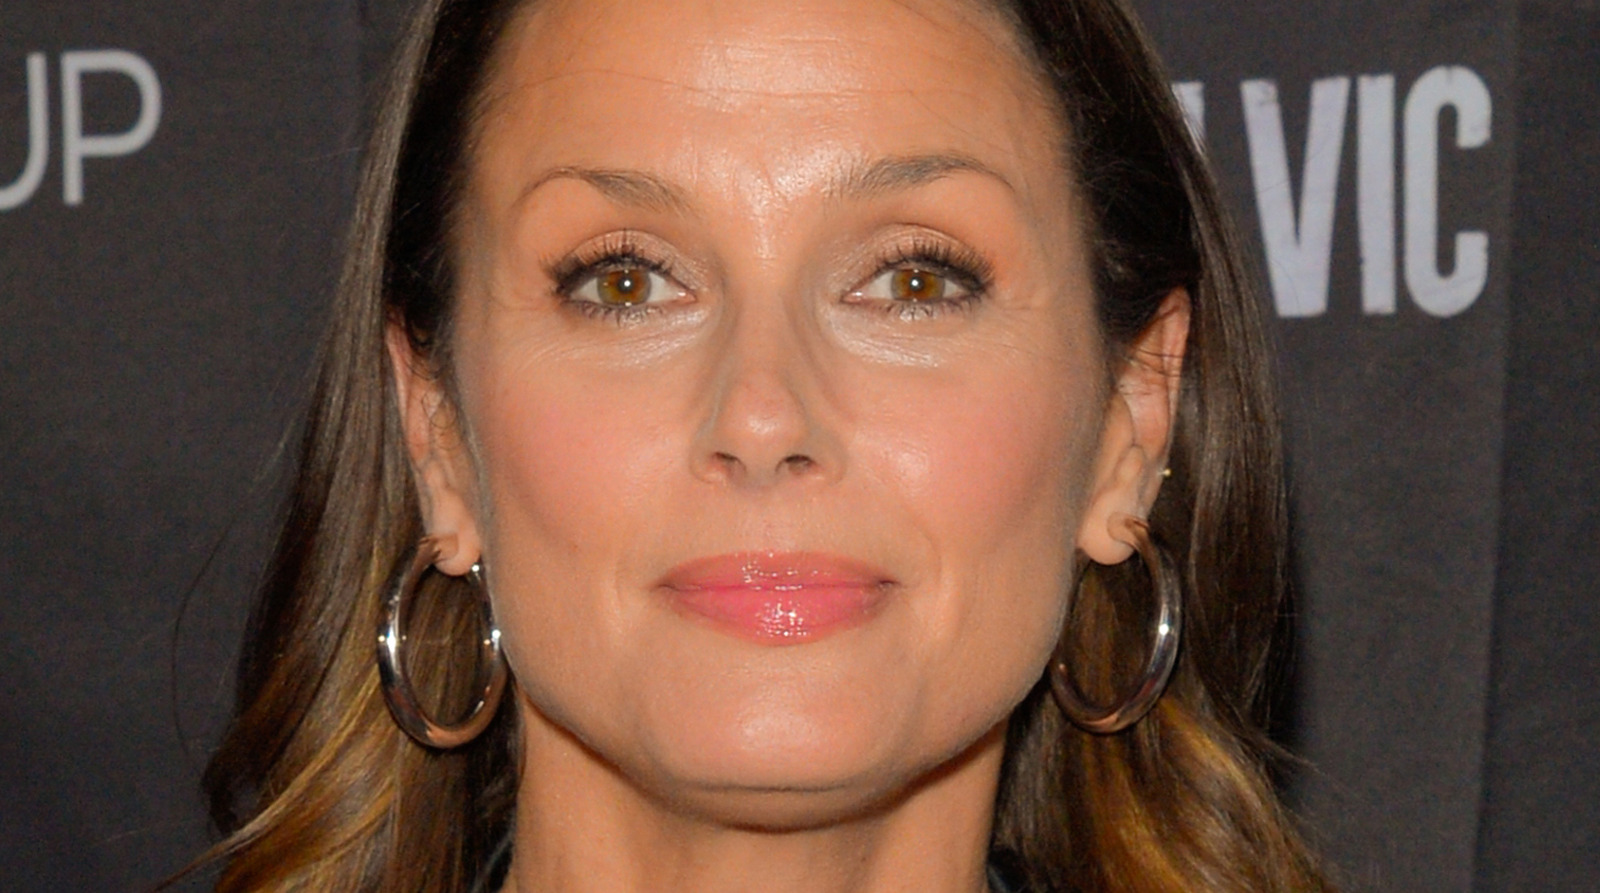 Bridget Moynahan Now: Where Is the Actress Today?